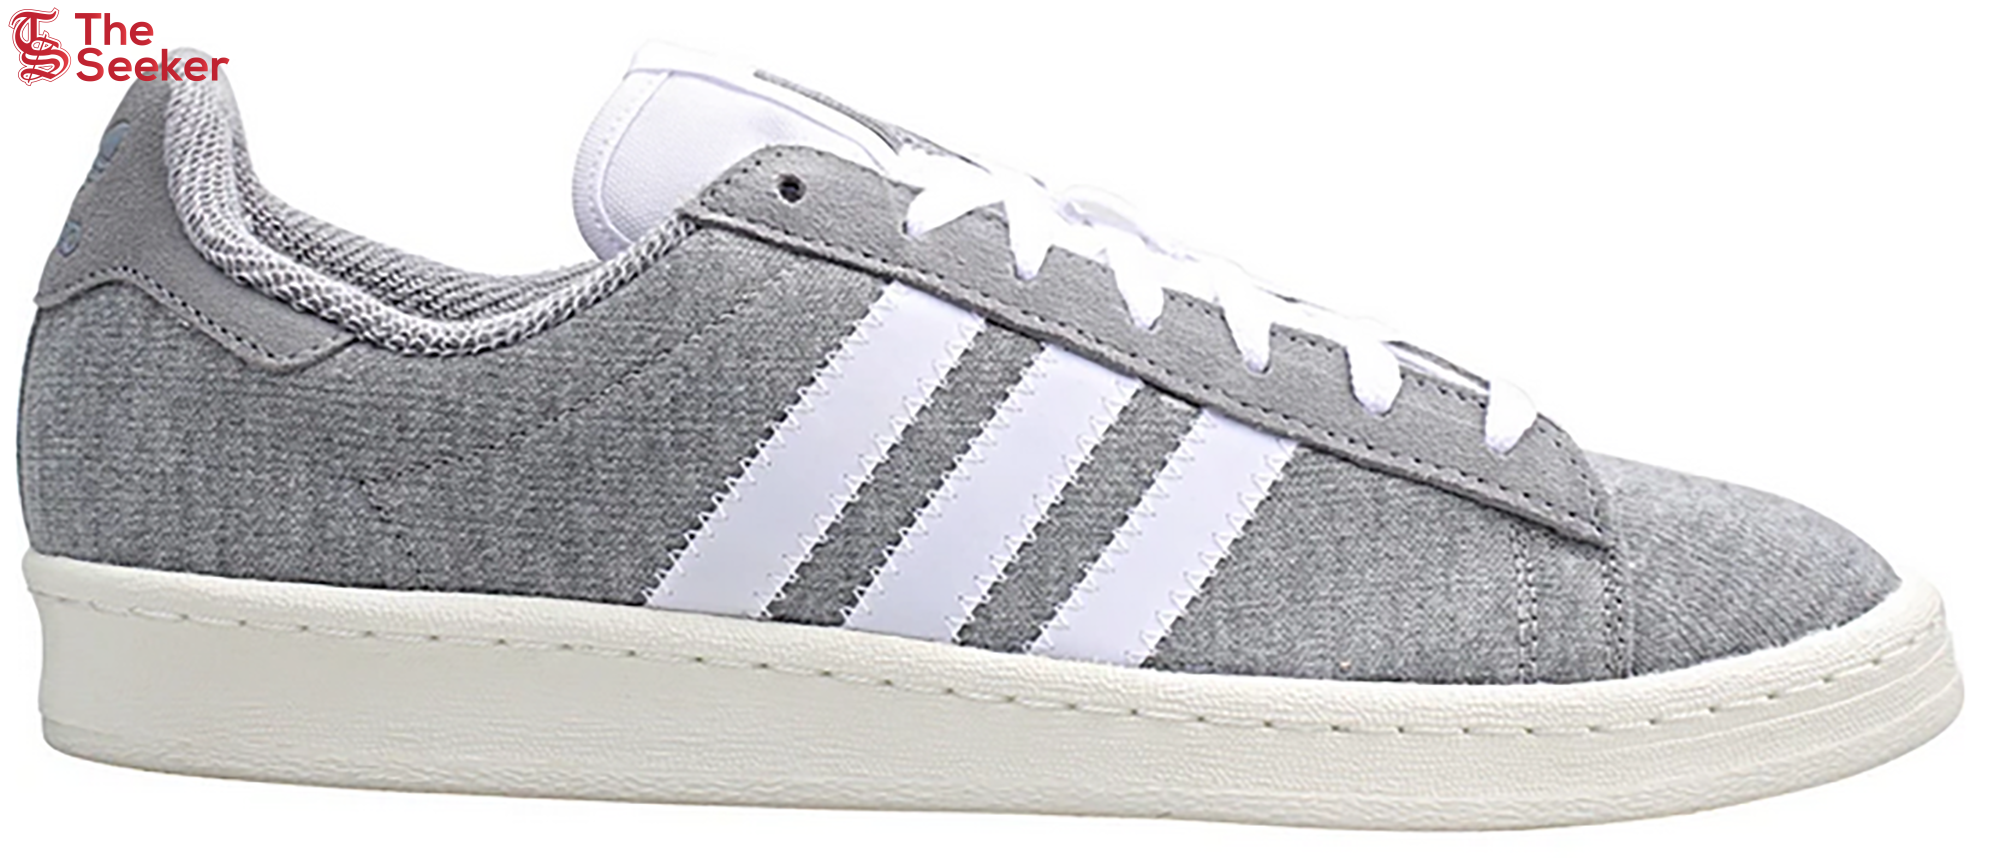 adidas Campus 80s Bedwin & the Heartbreakers